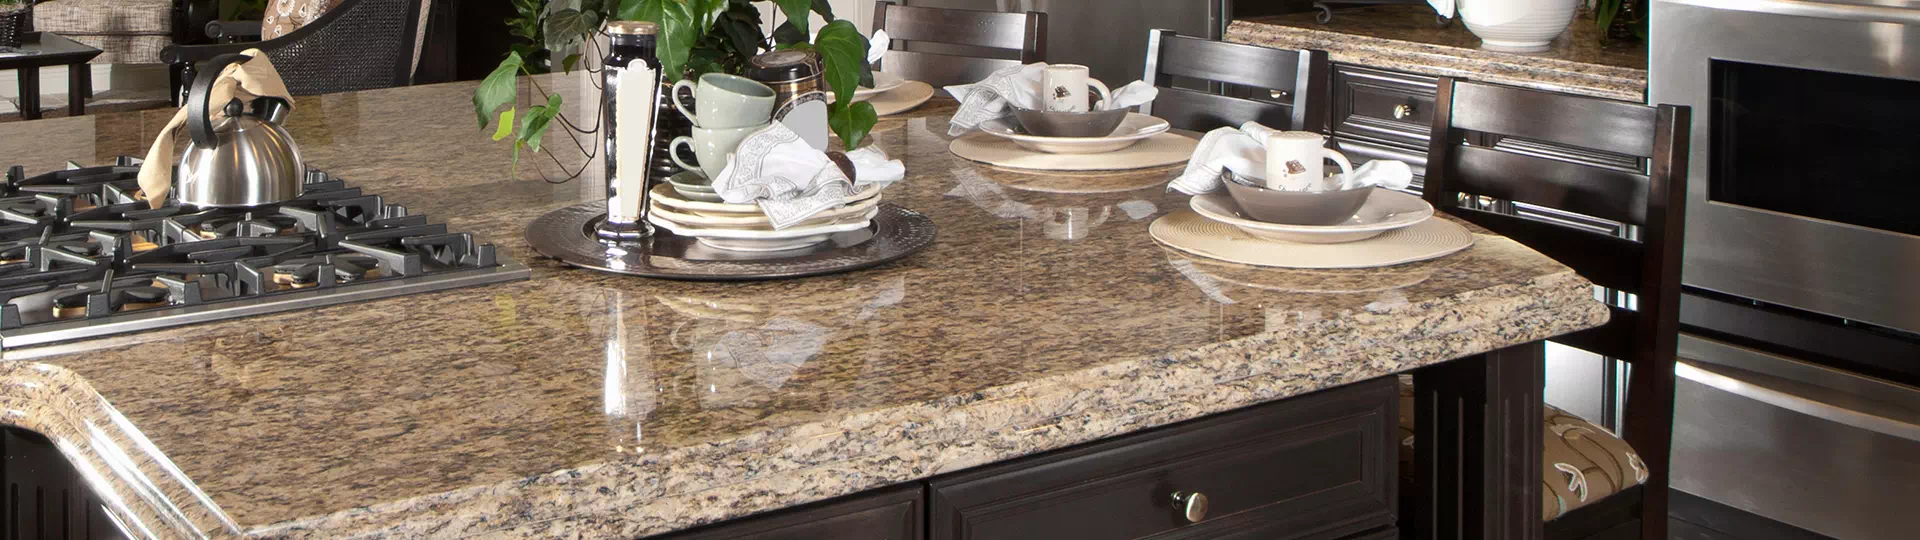 How To Disinfect Granite Countertops Simple Green